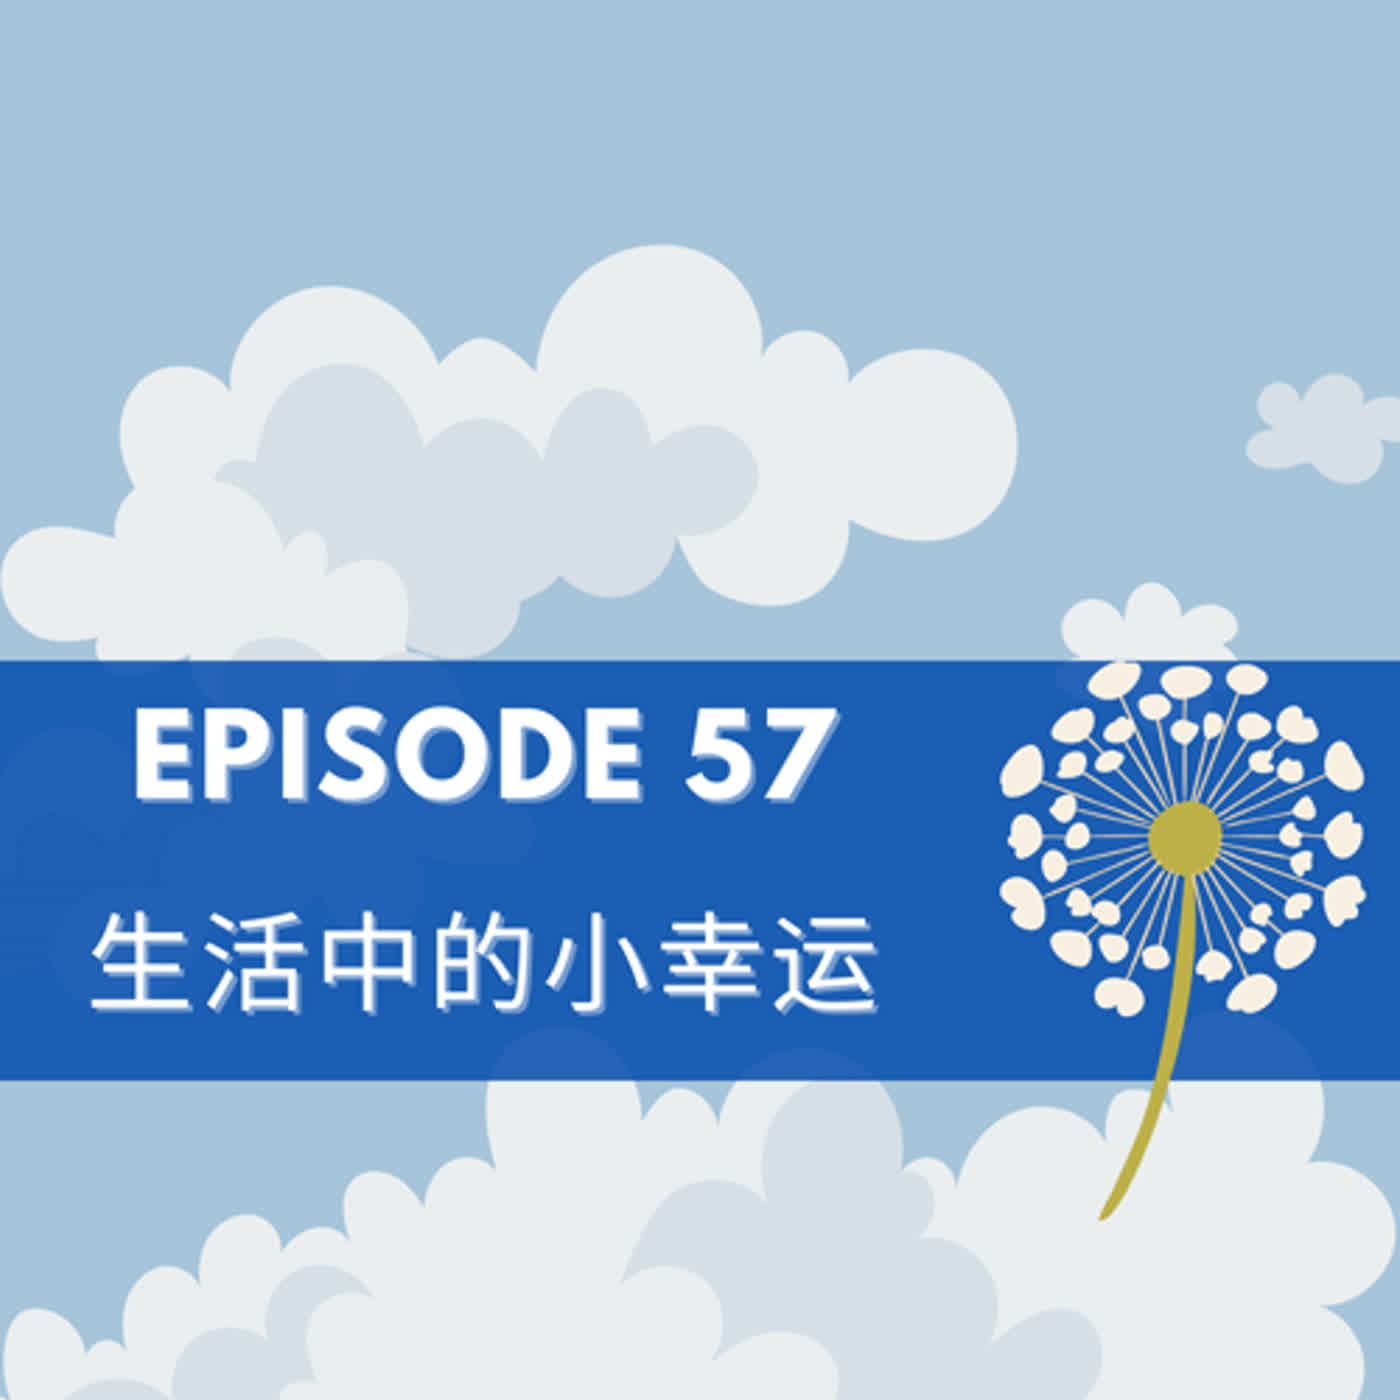 Episode 57 | 生活中的小幸运 Little lucky things in our lives